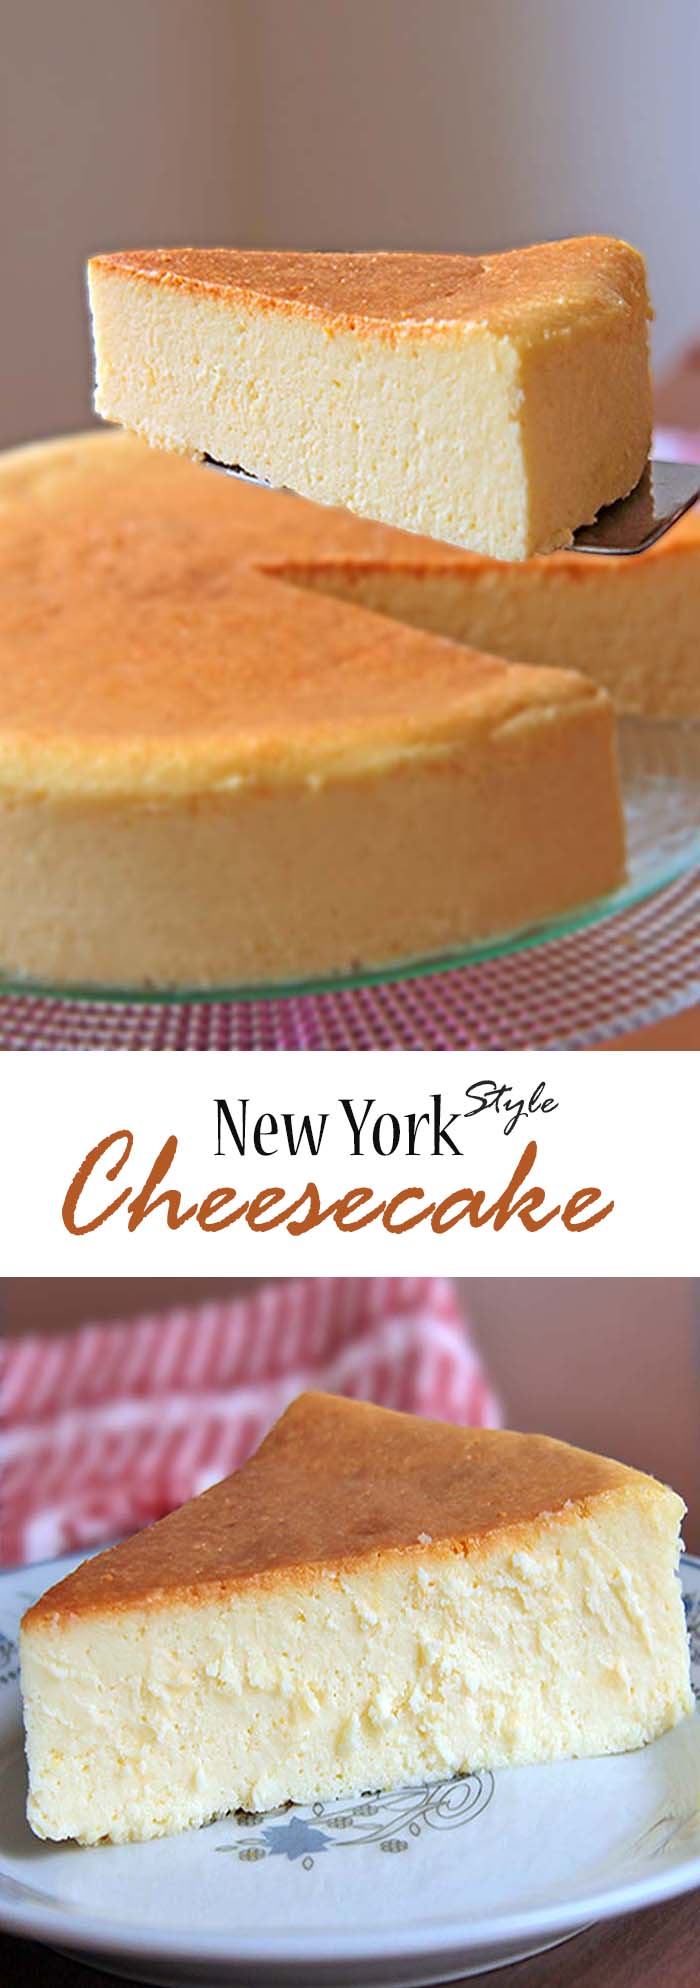 New York Style Cheesecake is creamy smooth, lightly sweet, with a touch of lemon.  Suffice it to say, my search for the perfect cheesecake recipe ends here. #cheesecake #newyork